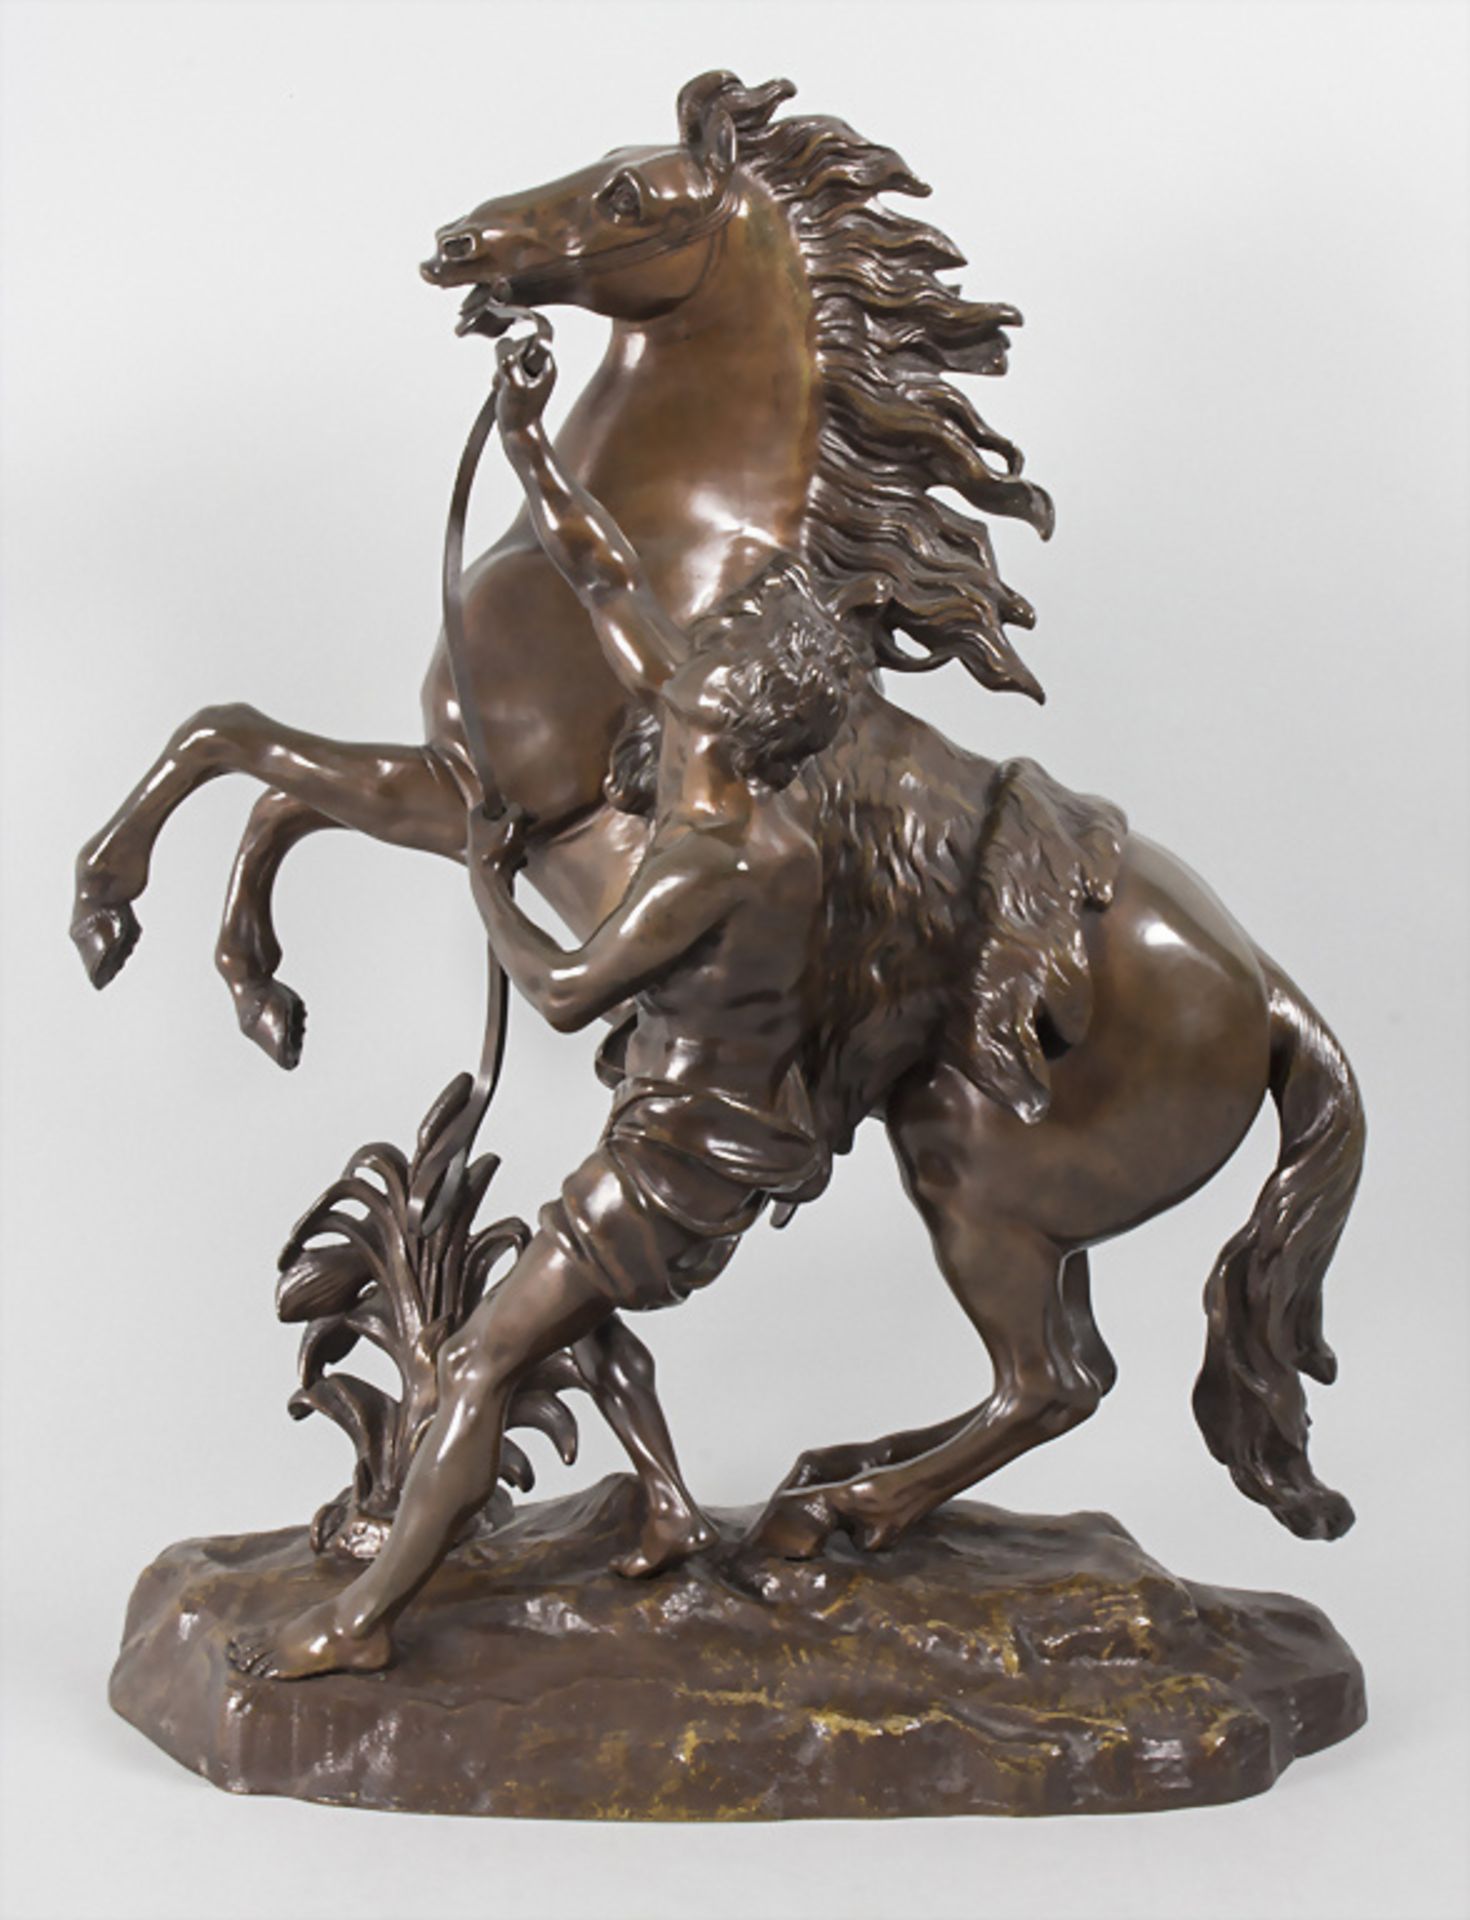 Guillaume Coustou (1677-1746), 'Das Pferd von Marly' / Bronze sculpture 'The horse of Marly'